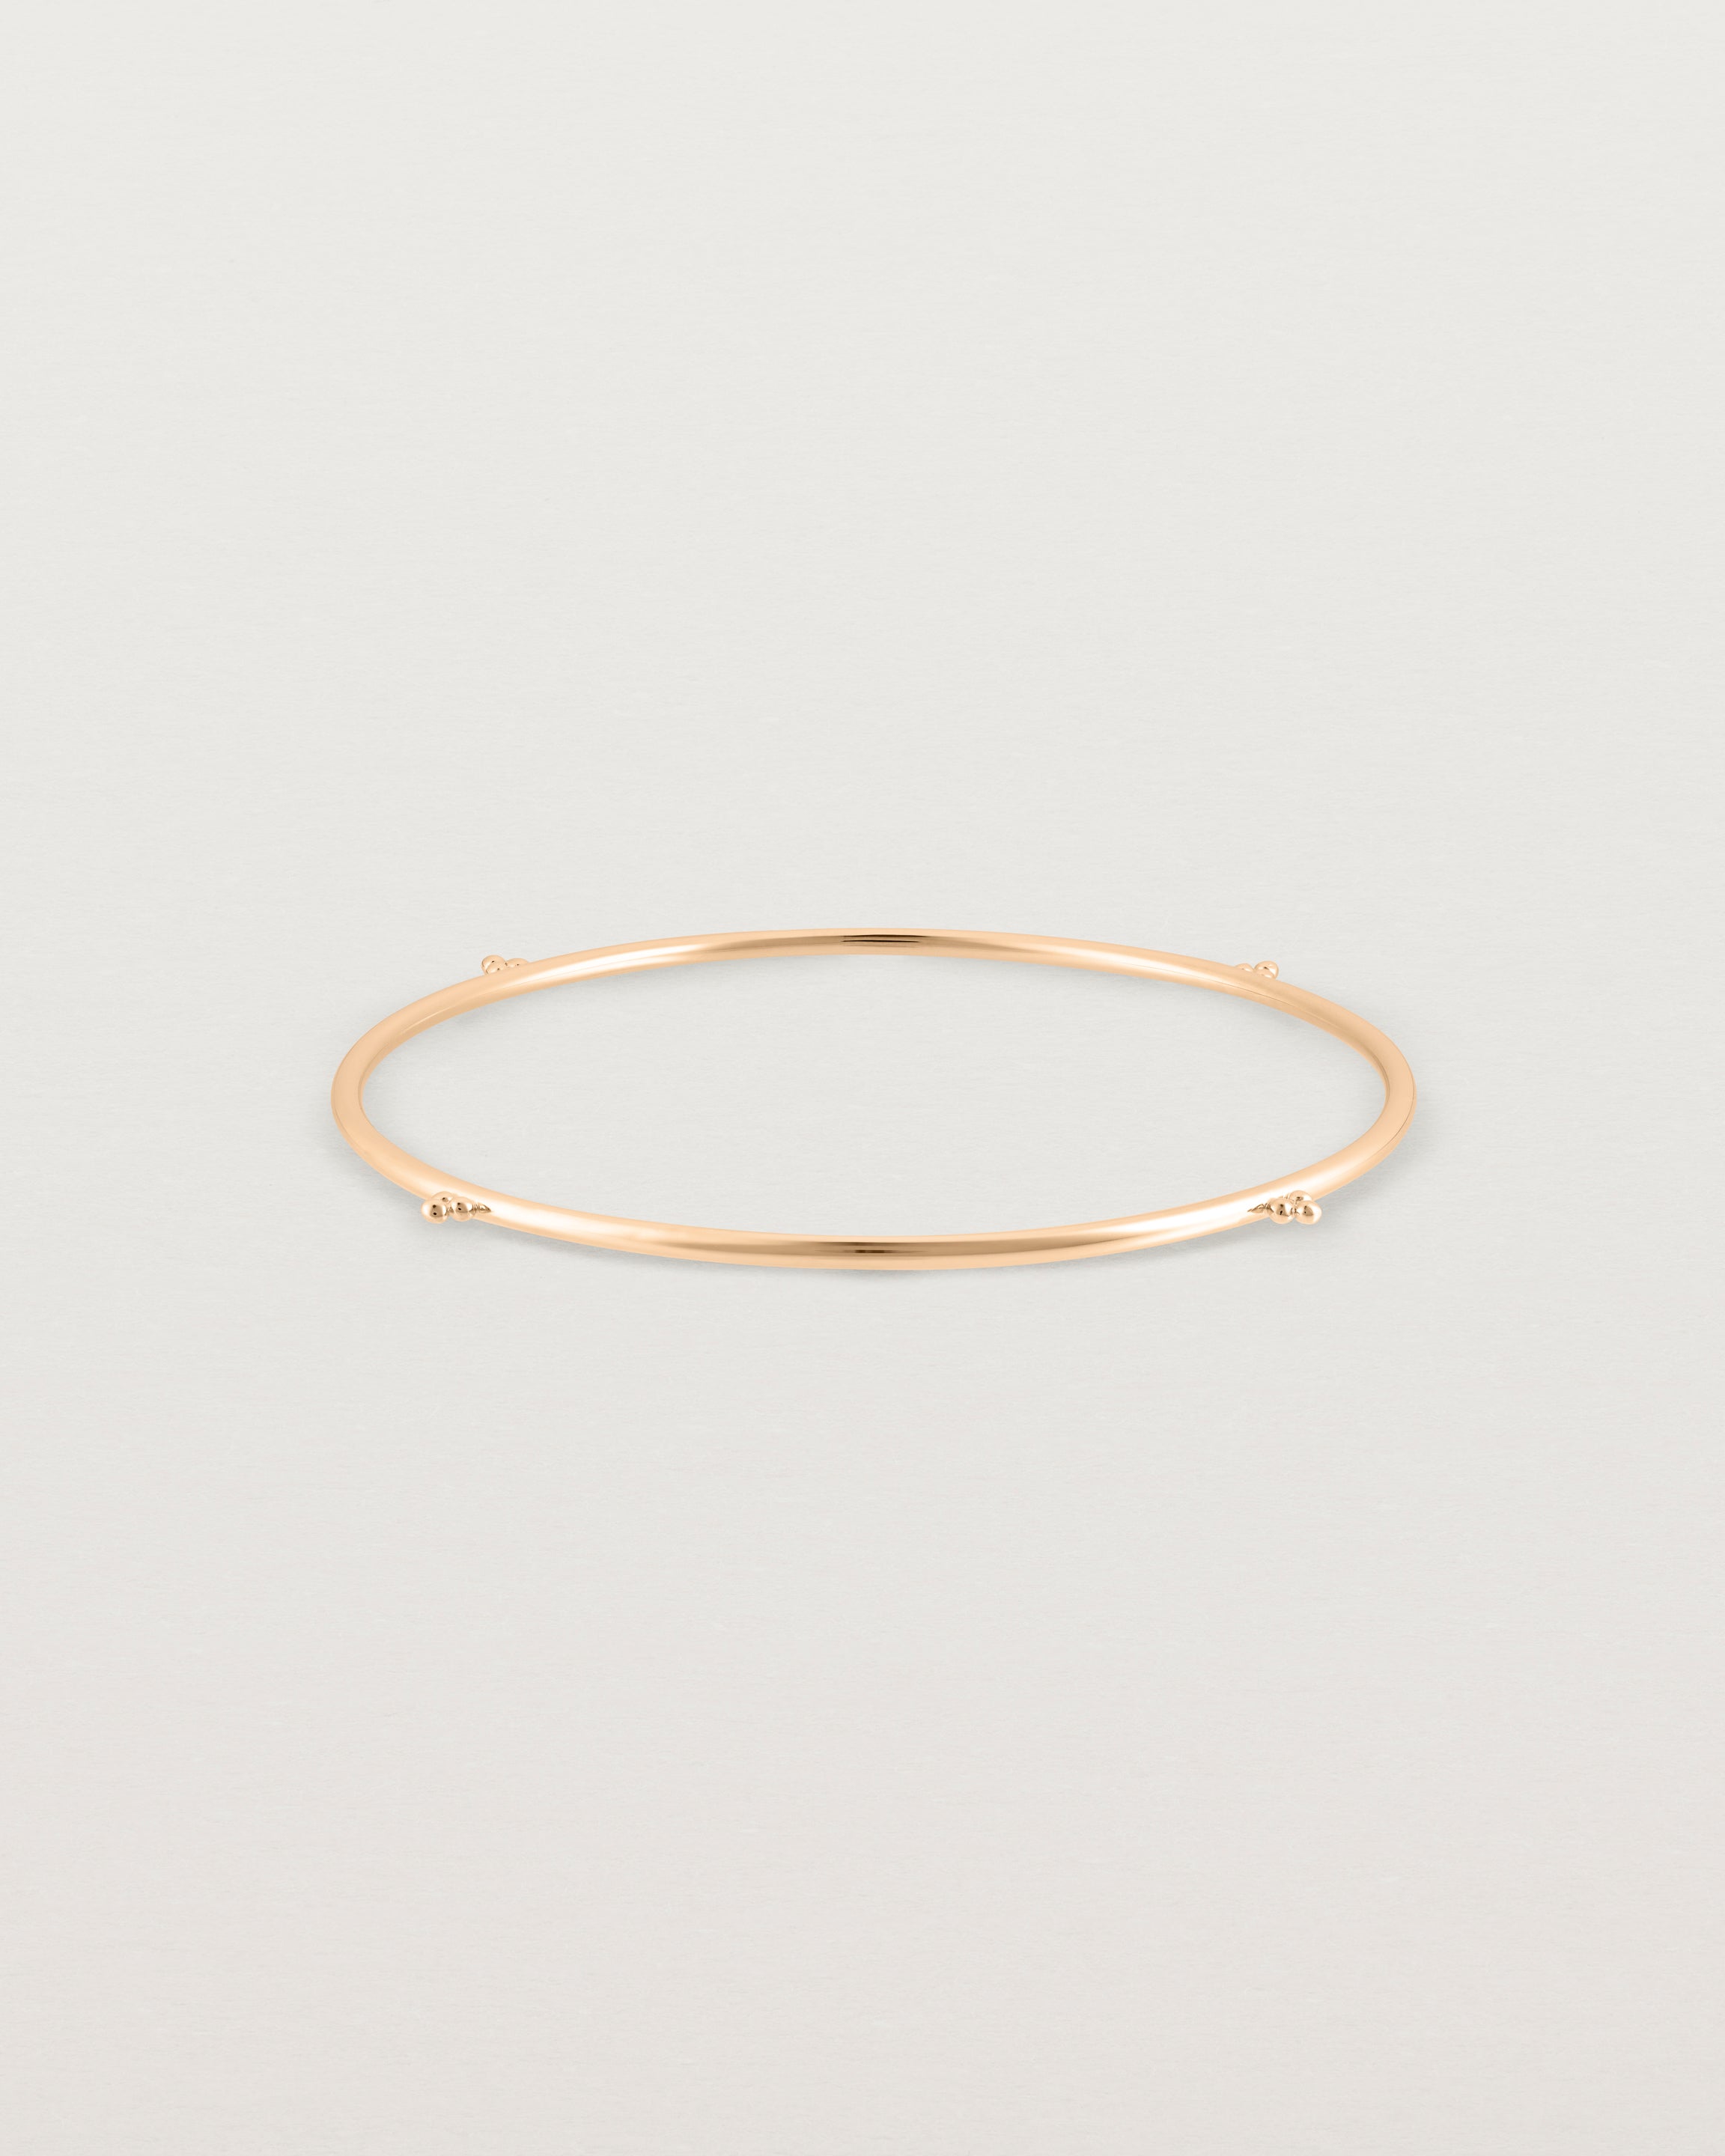 Front view of the Alya Bangle in Rose Gold.